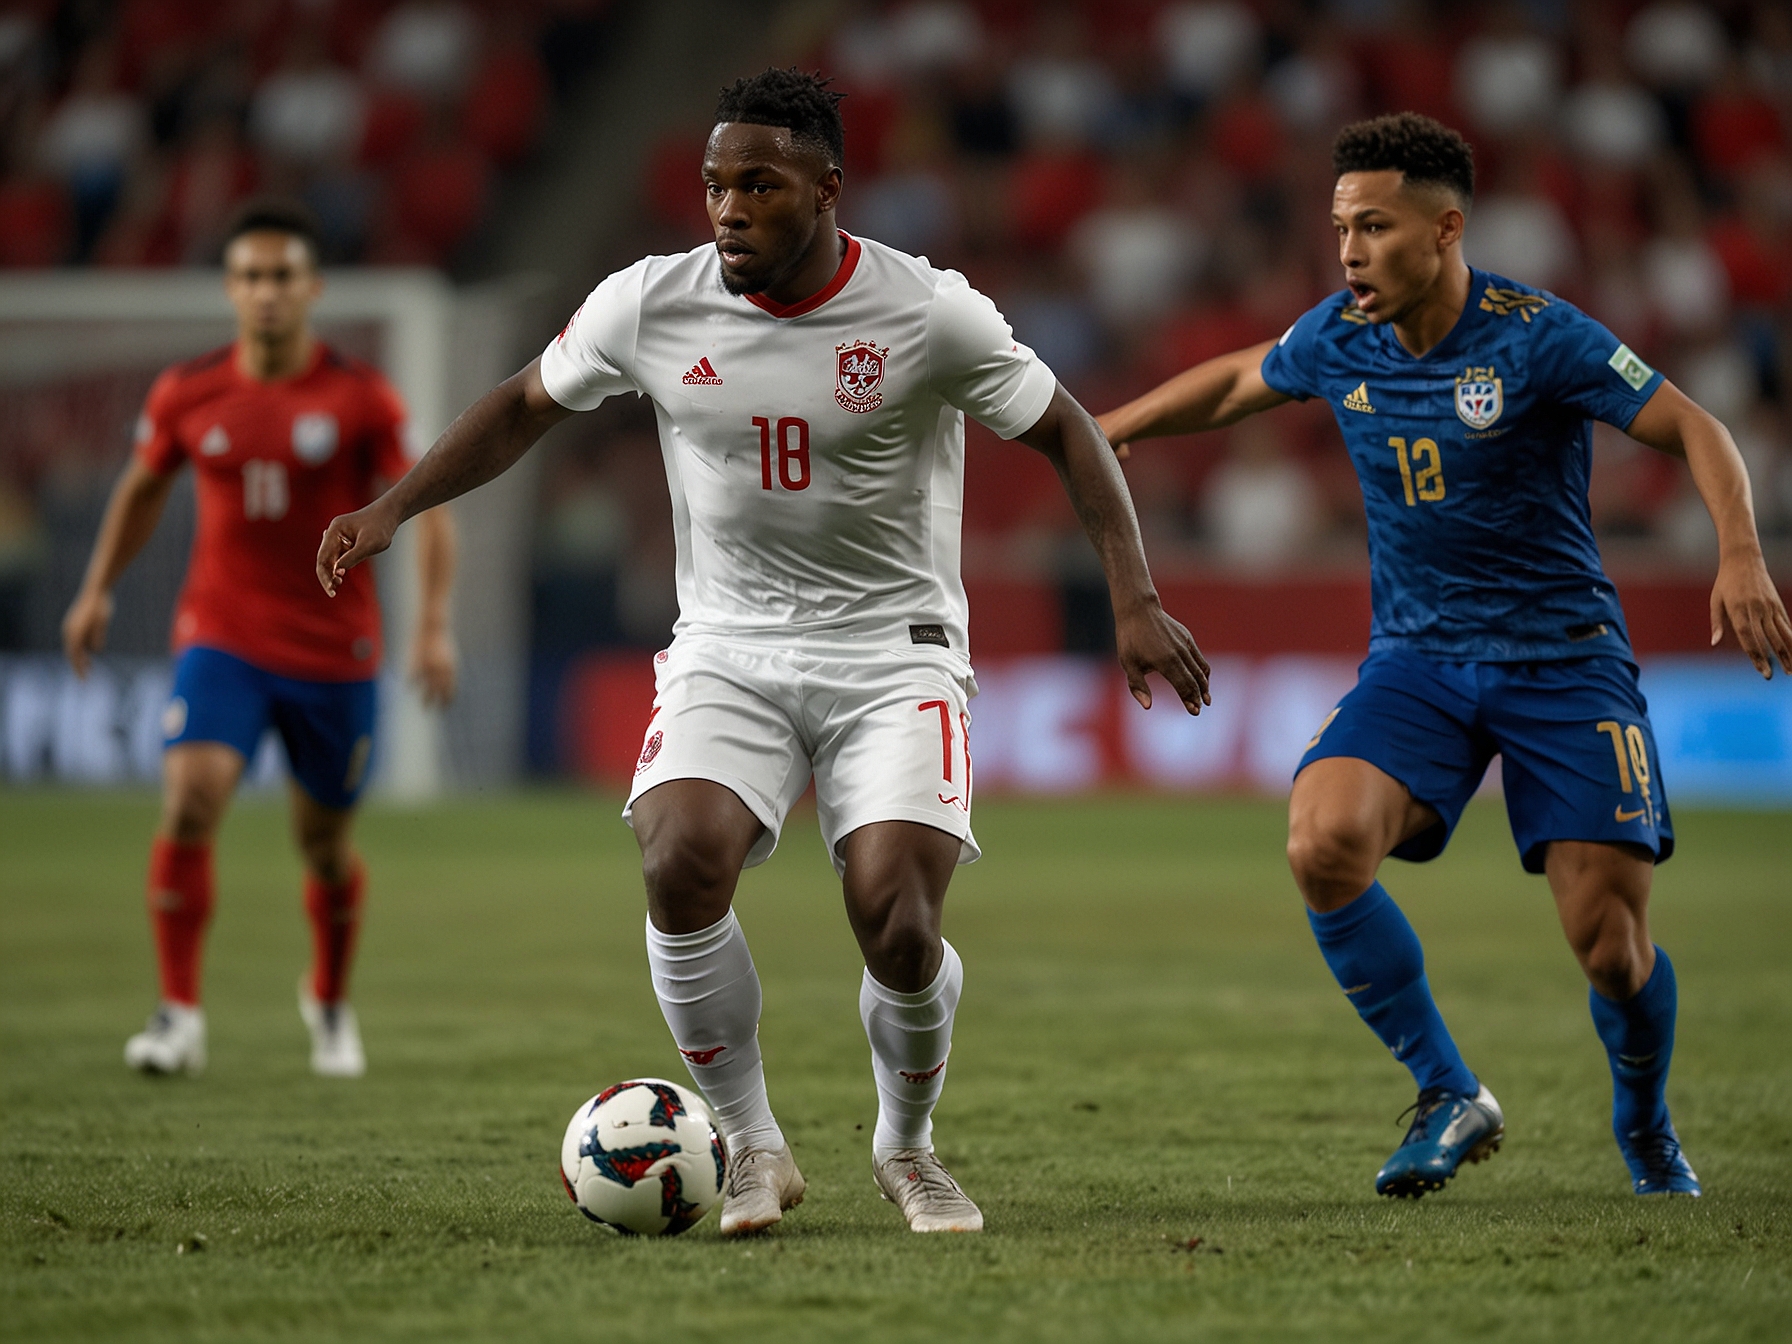 Tajon Buchanan dribbling past defenders during a high-stakes match, showcasing his agility and speed which are pivotal for Canada's performance in the Copa America.